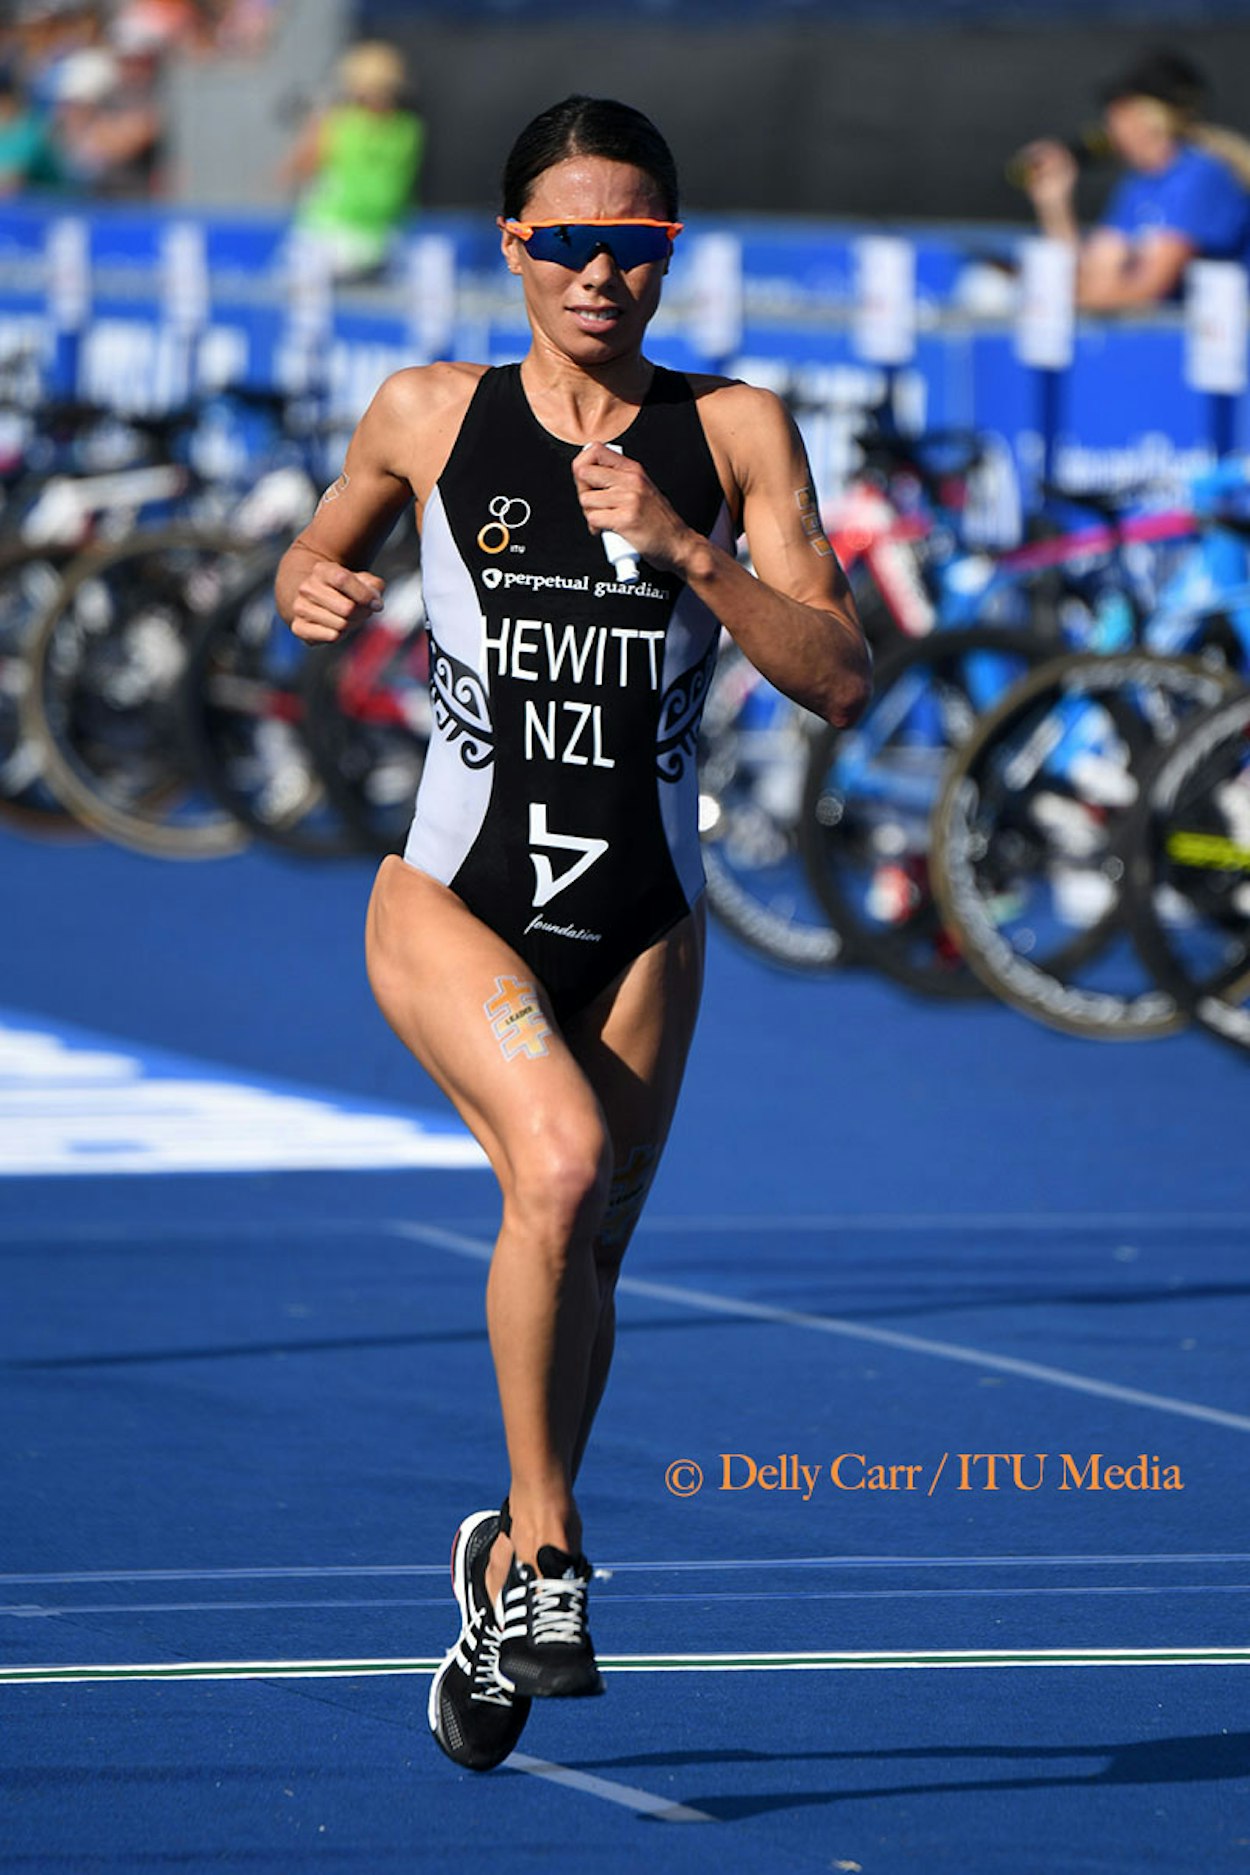 Looking Back on the 2017 WTS Season Through Pictures